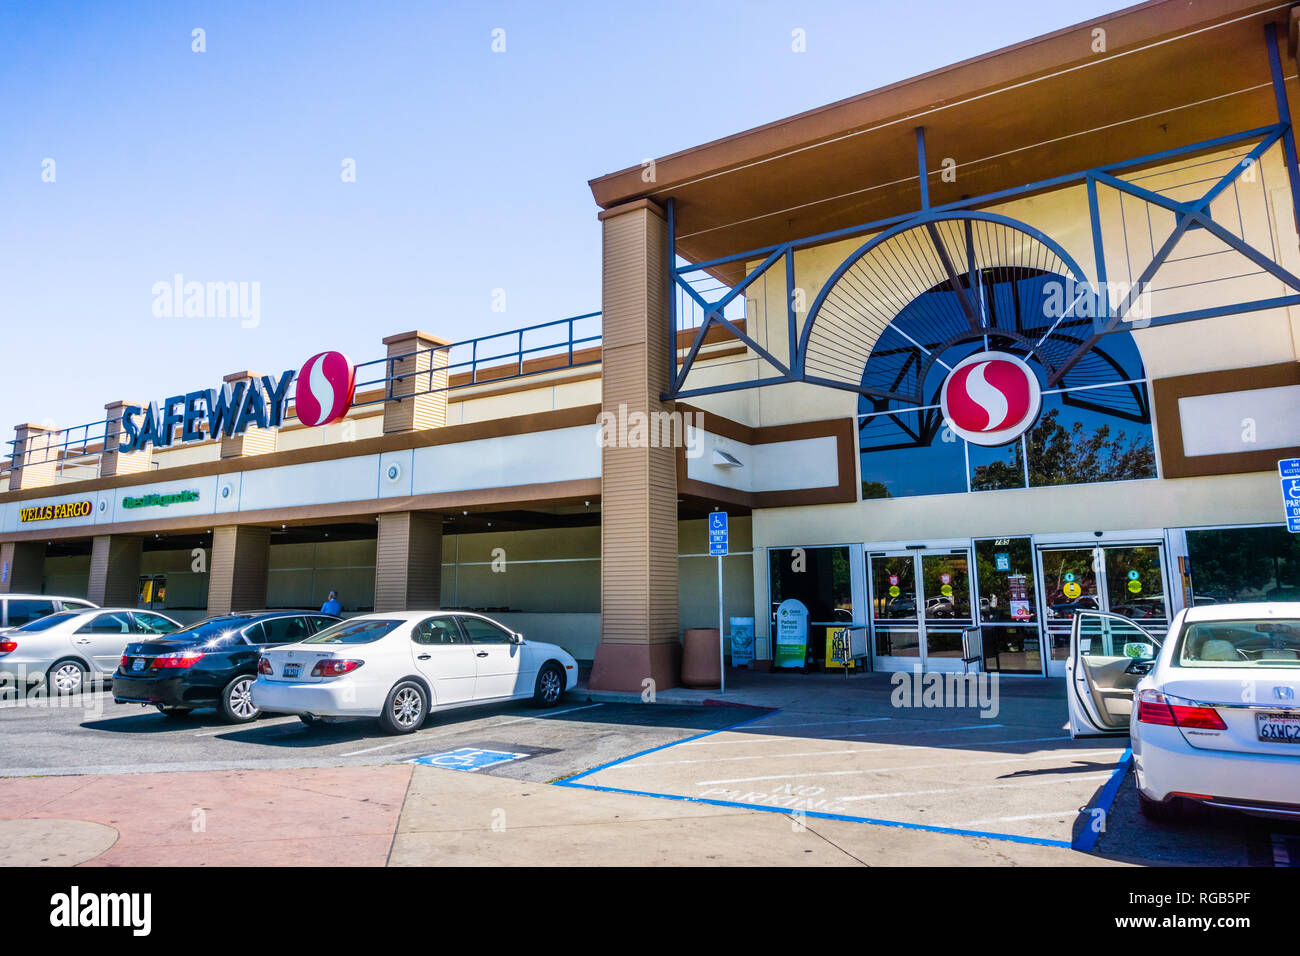 June 19, 2018 Santa Clara / CA / USA - The entrance of one of the Safeway supermarkets in south San Francisco bay area Stock Photo